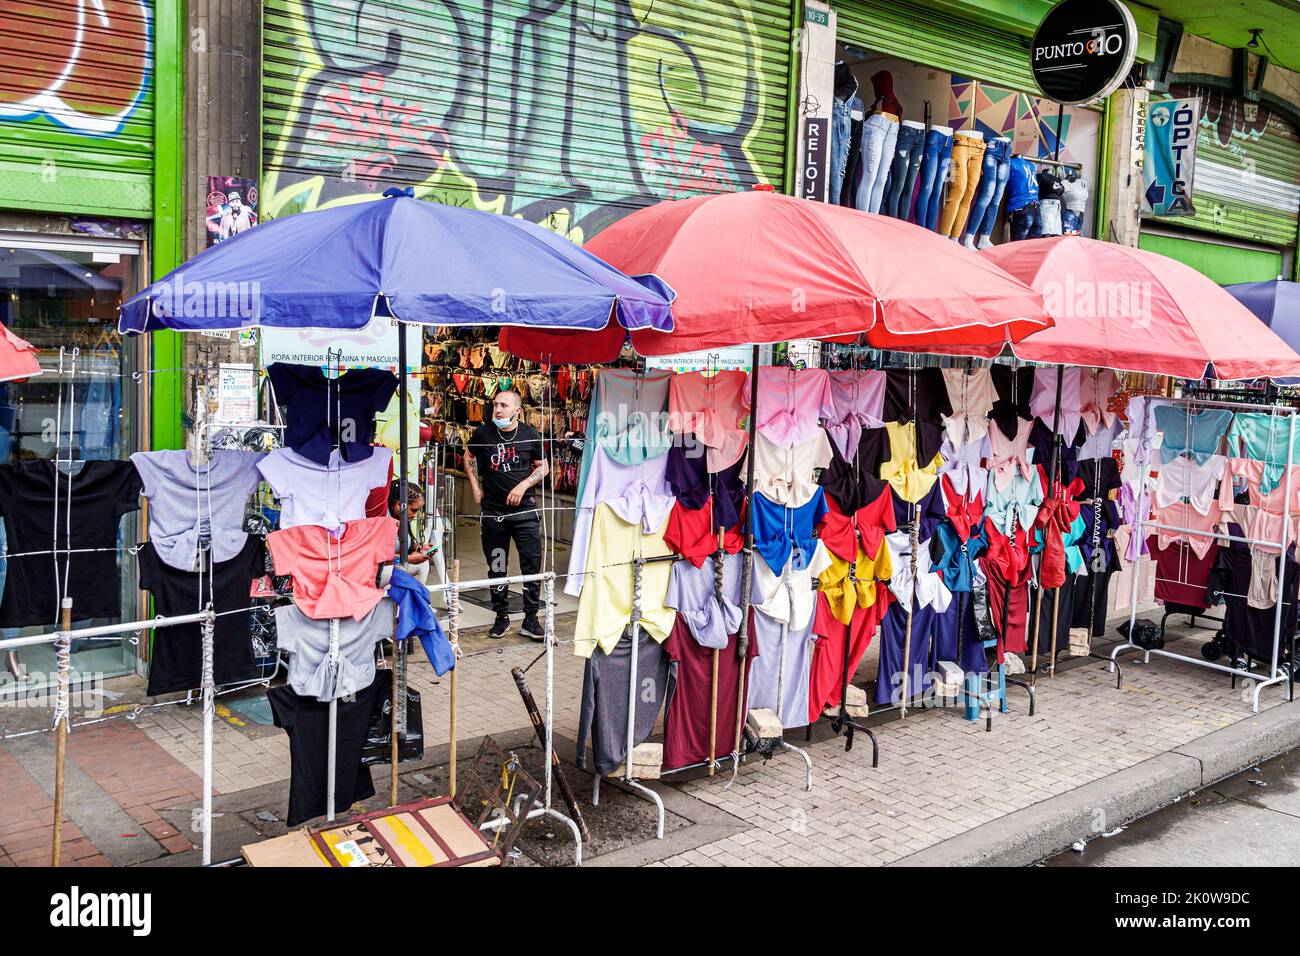 Bogota Colombia,Carrera 10,store stores business businesses shop shops market markets marketplace selling buying shopping,sidewalk display sale umbrel Stock Photo